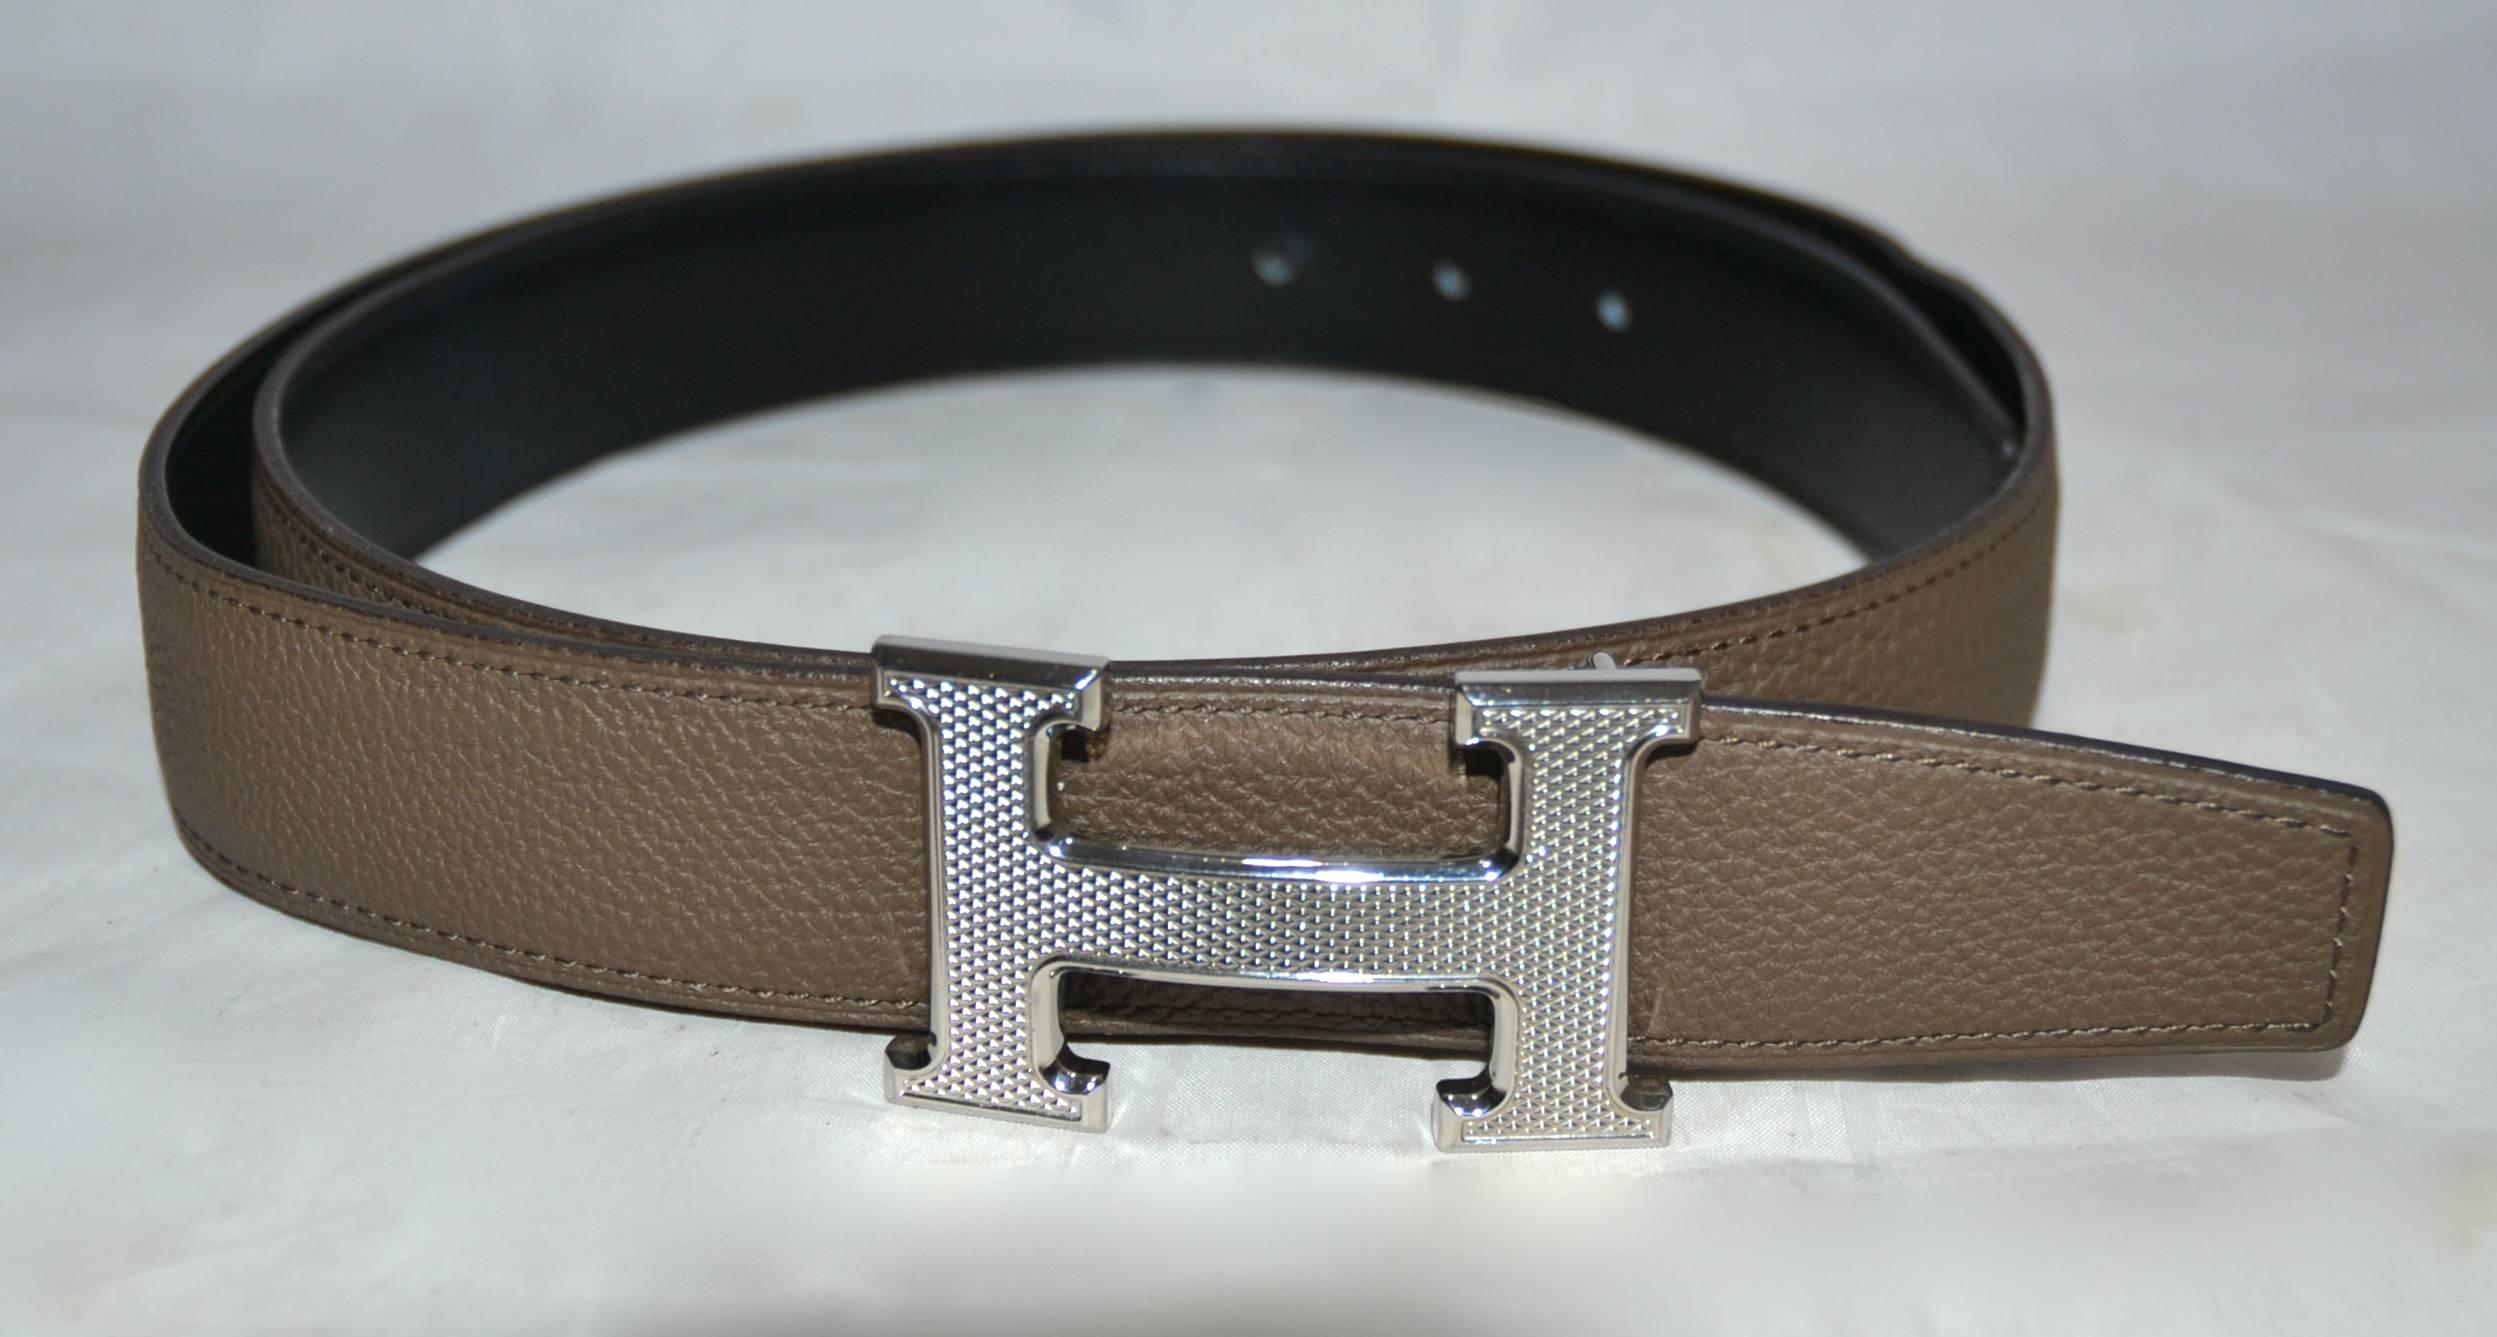 Authentic Hermes Silver Tone H Belt.

Reversible, Etoupe Grey exterior, Black Calf Interior

Size 90cm / 39inch. Width: Buckle width 2.6 inch 

105cm in total, 90cm to middle belt hole.

Excellent Condition. 

Includes: Buckle Storage Bag